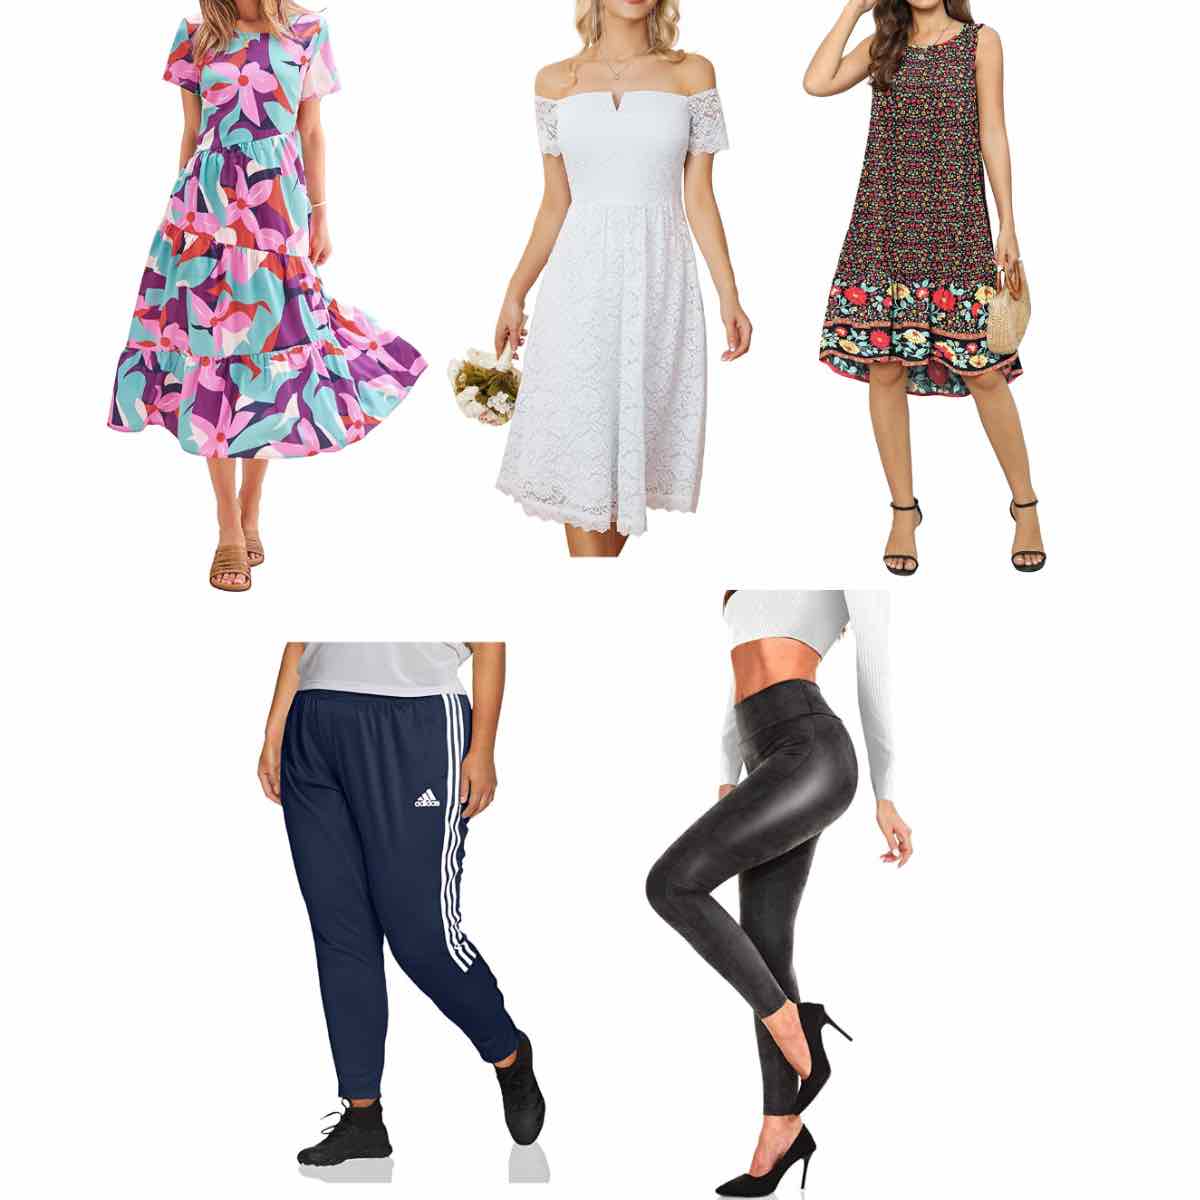 Gorgeous apparel for women at low prices here